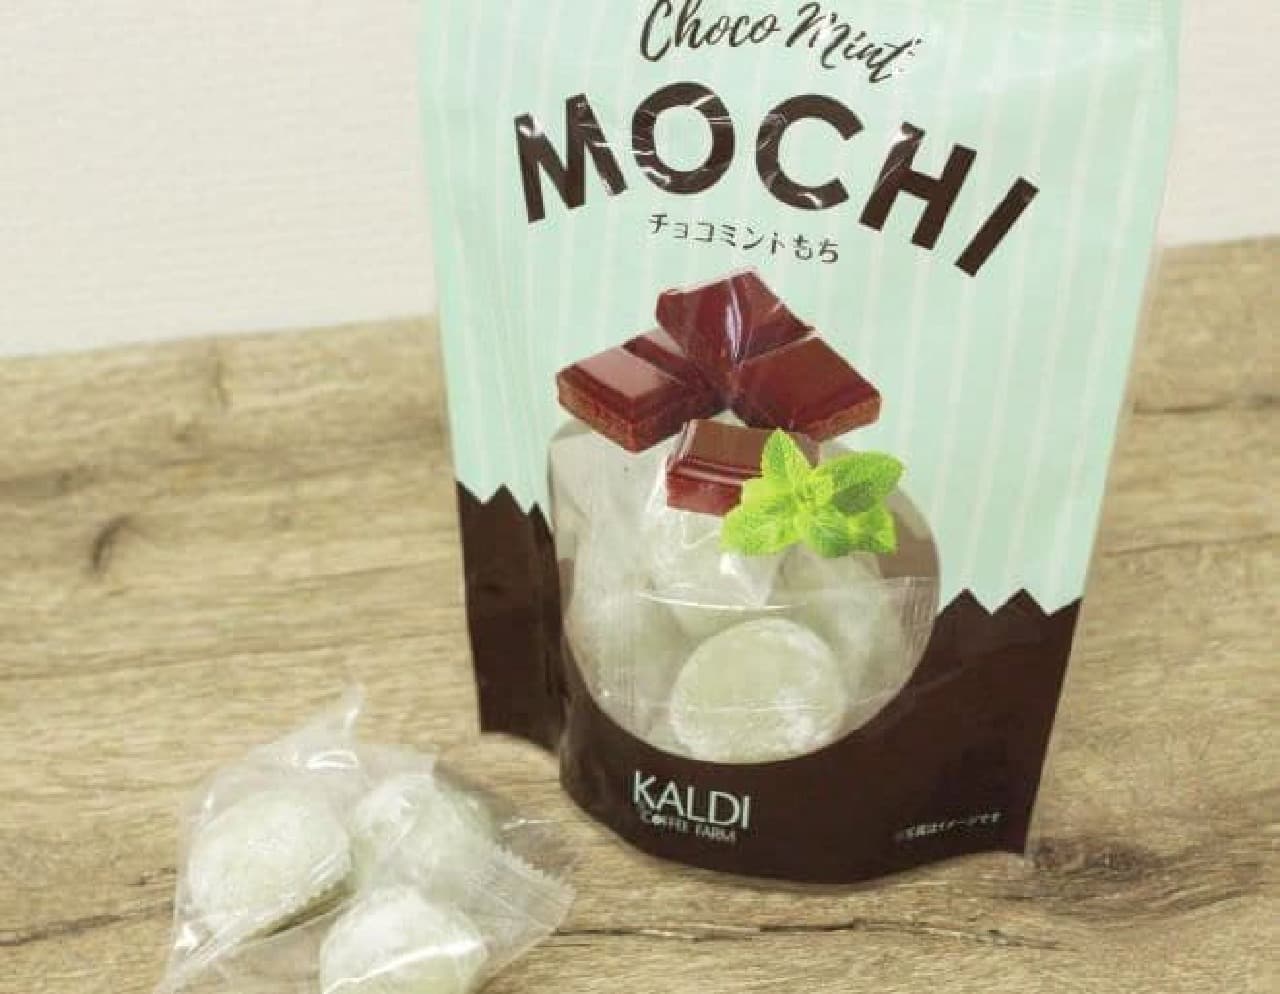 Chocolate mint mochi is a sweet made by wrapping chocolate cream in a mochi with marshmallows and refreshing mint.